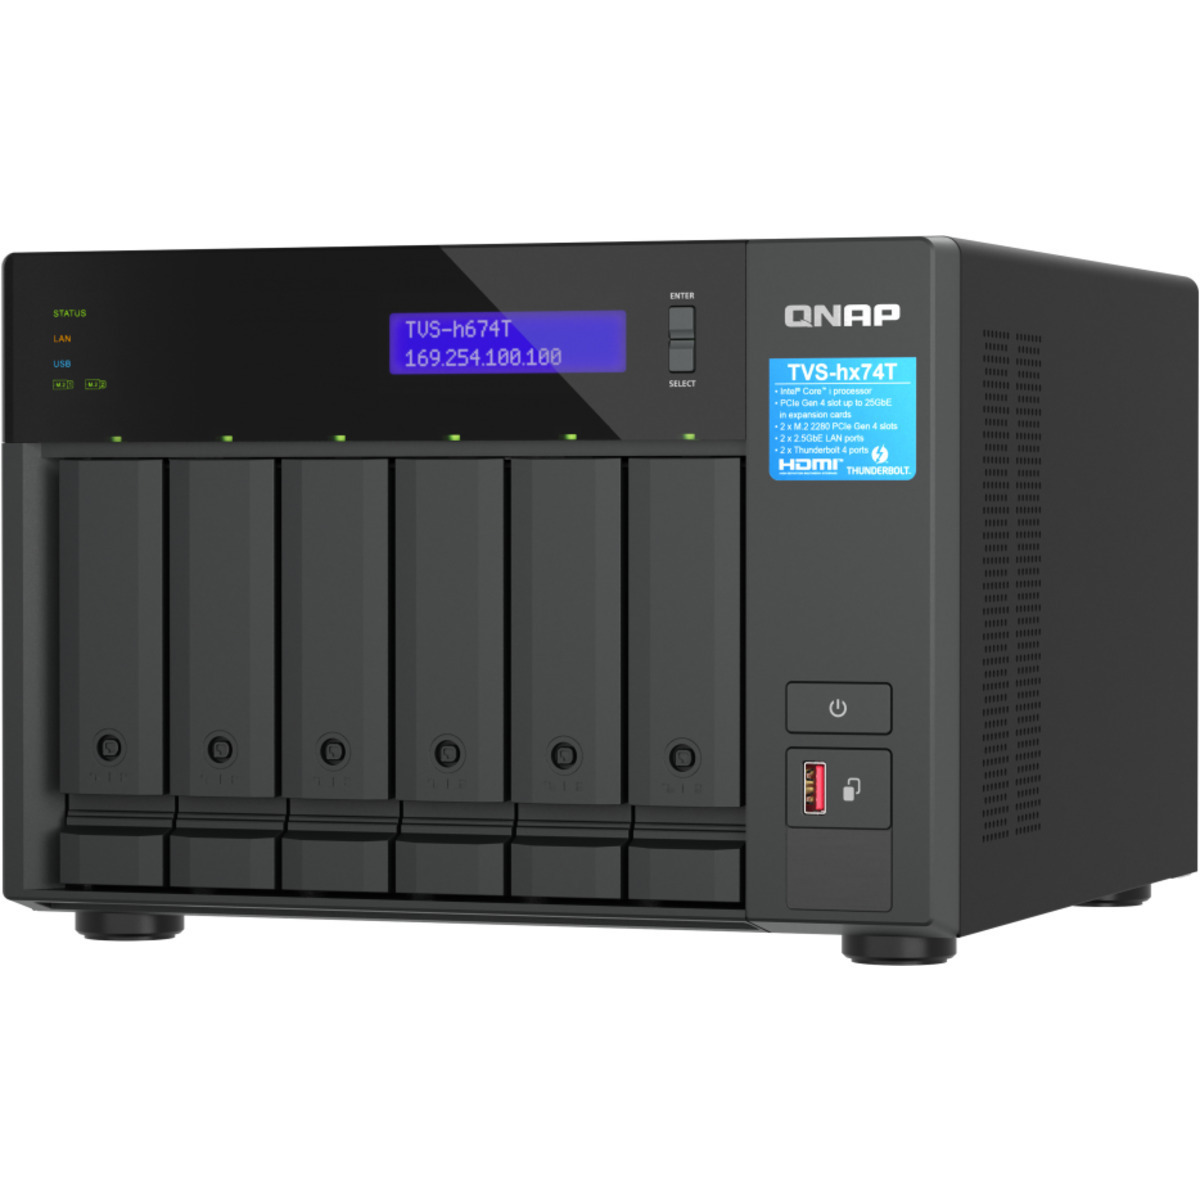 QNAP TVS-h674T Core i5 Thunderbolt 4 40tb 6-Bay Desktop Multimedia / Power User / Business DAS-NAS - Combo Direct + Network Storage Device 5x8tb TeamGroup EX2 Elite T253E2008T0C101 2.5 550/520MB/s SATA 6Gb/s SSD CONSUMER Class Drives Installed - Burn-In Tested TVS-h674T Core i5 Thunderbolt 4